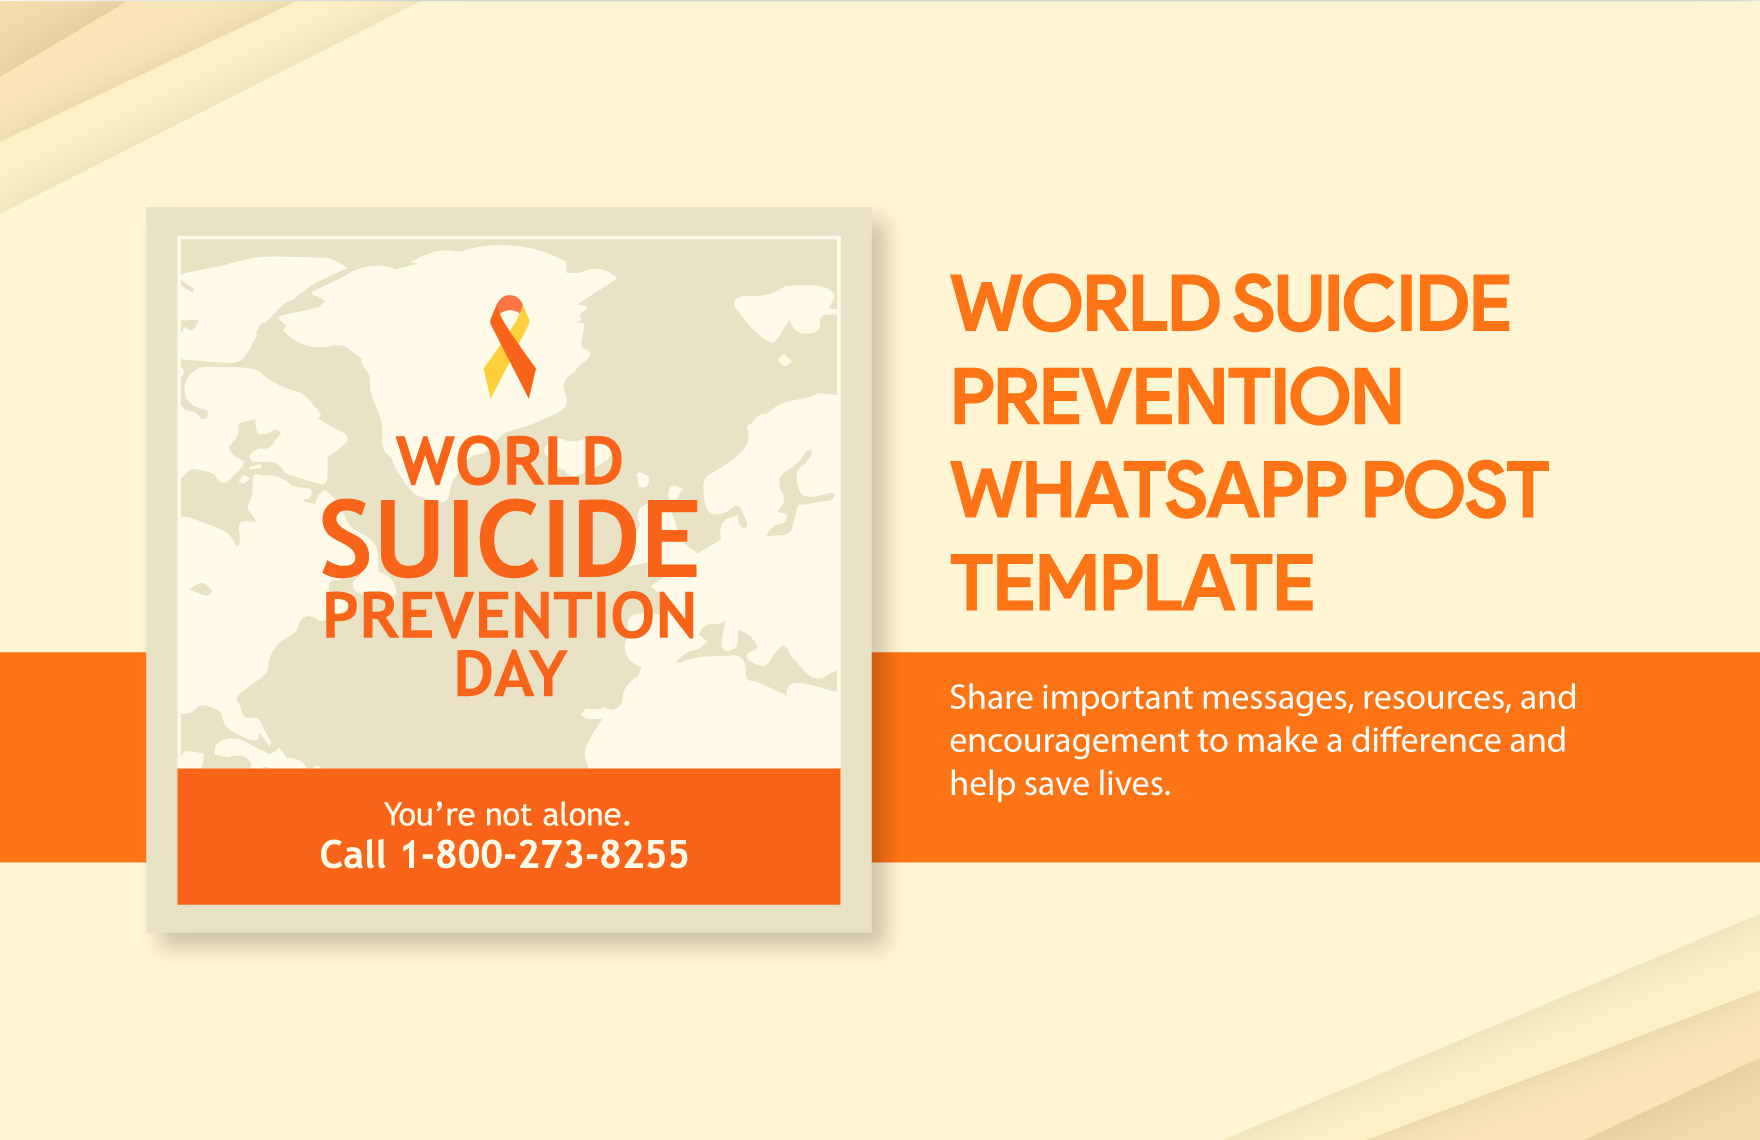 Free World Suicide Prevention Day WhatsApp Post Template in Illustrator, PSD, PNG